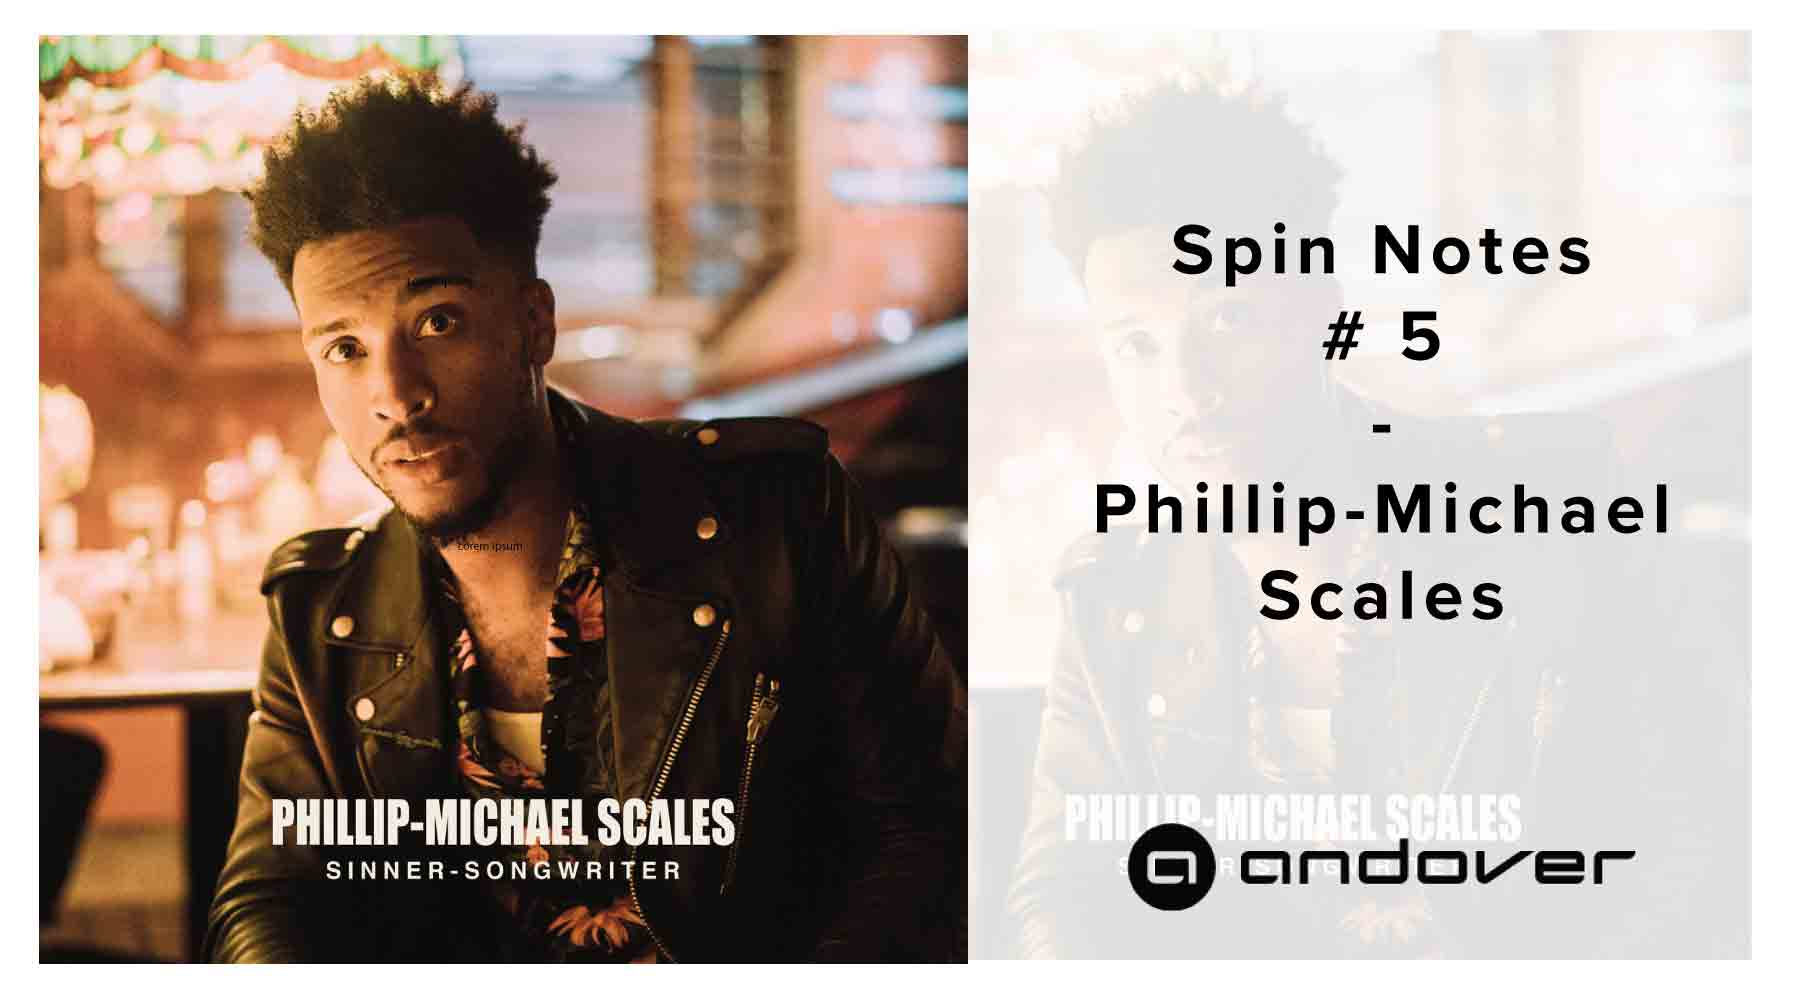 Spin Notes #5 - Phillip-Michael Scales - "Sinner-Songwriter"